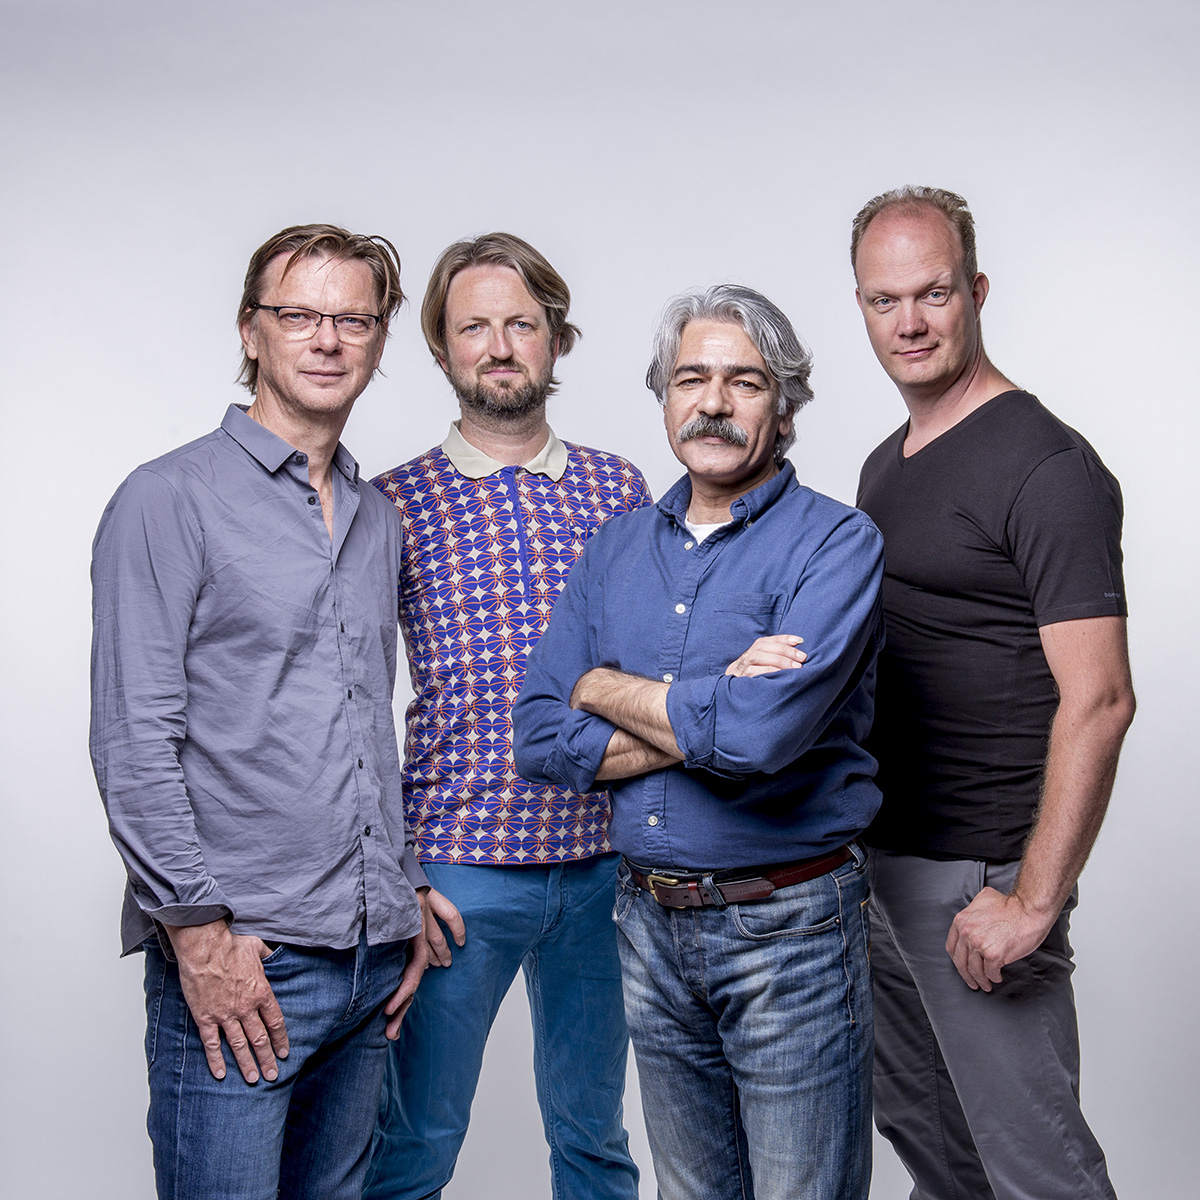 Kayhan Kalhor and the three Dutch jazz musicians of the Rembrandt Frerichs Trio.